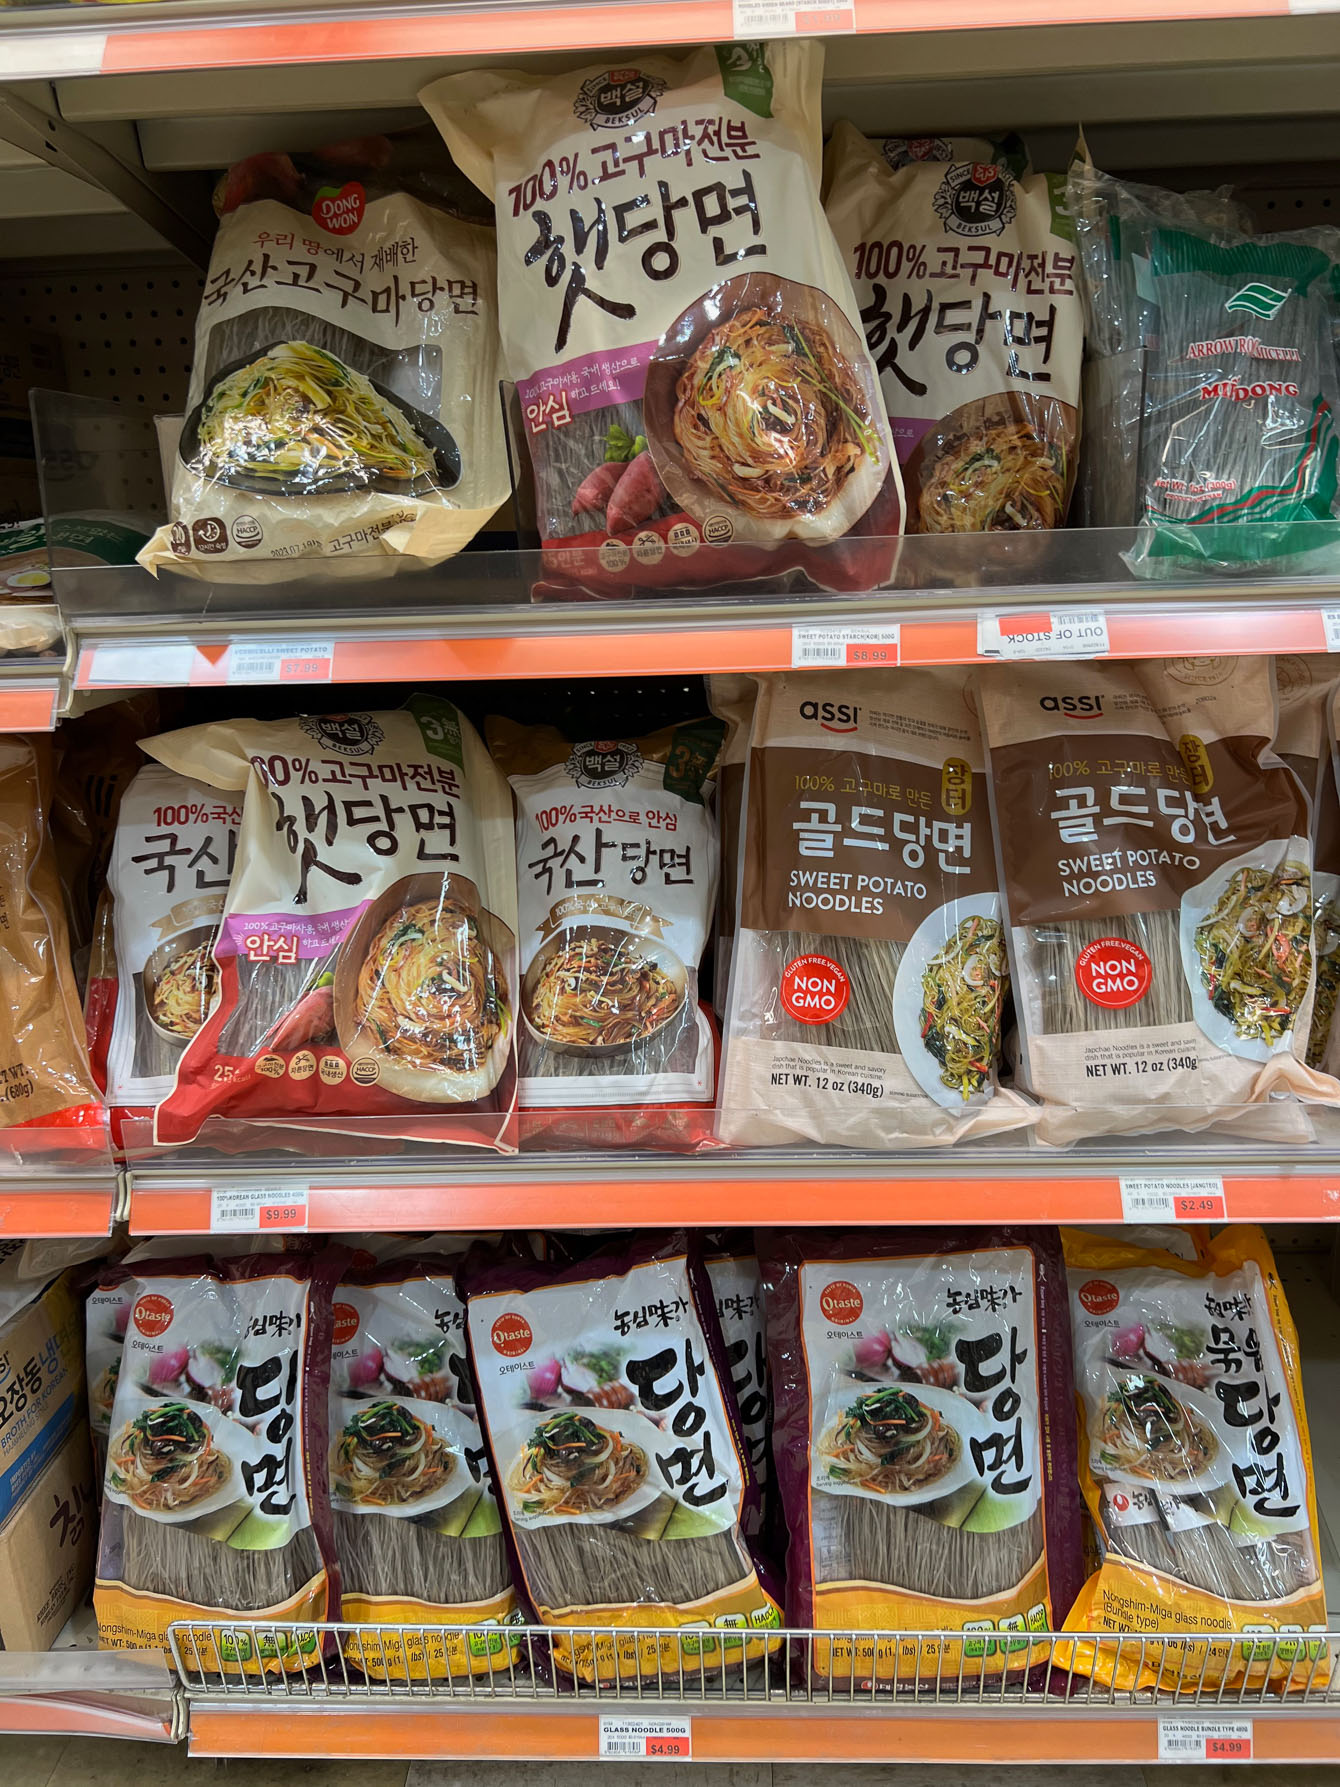 Korean glass noodles are displayed on the shelf